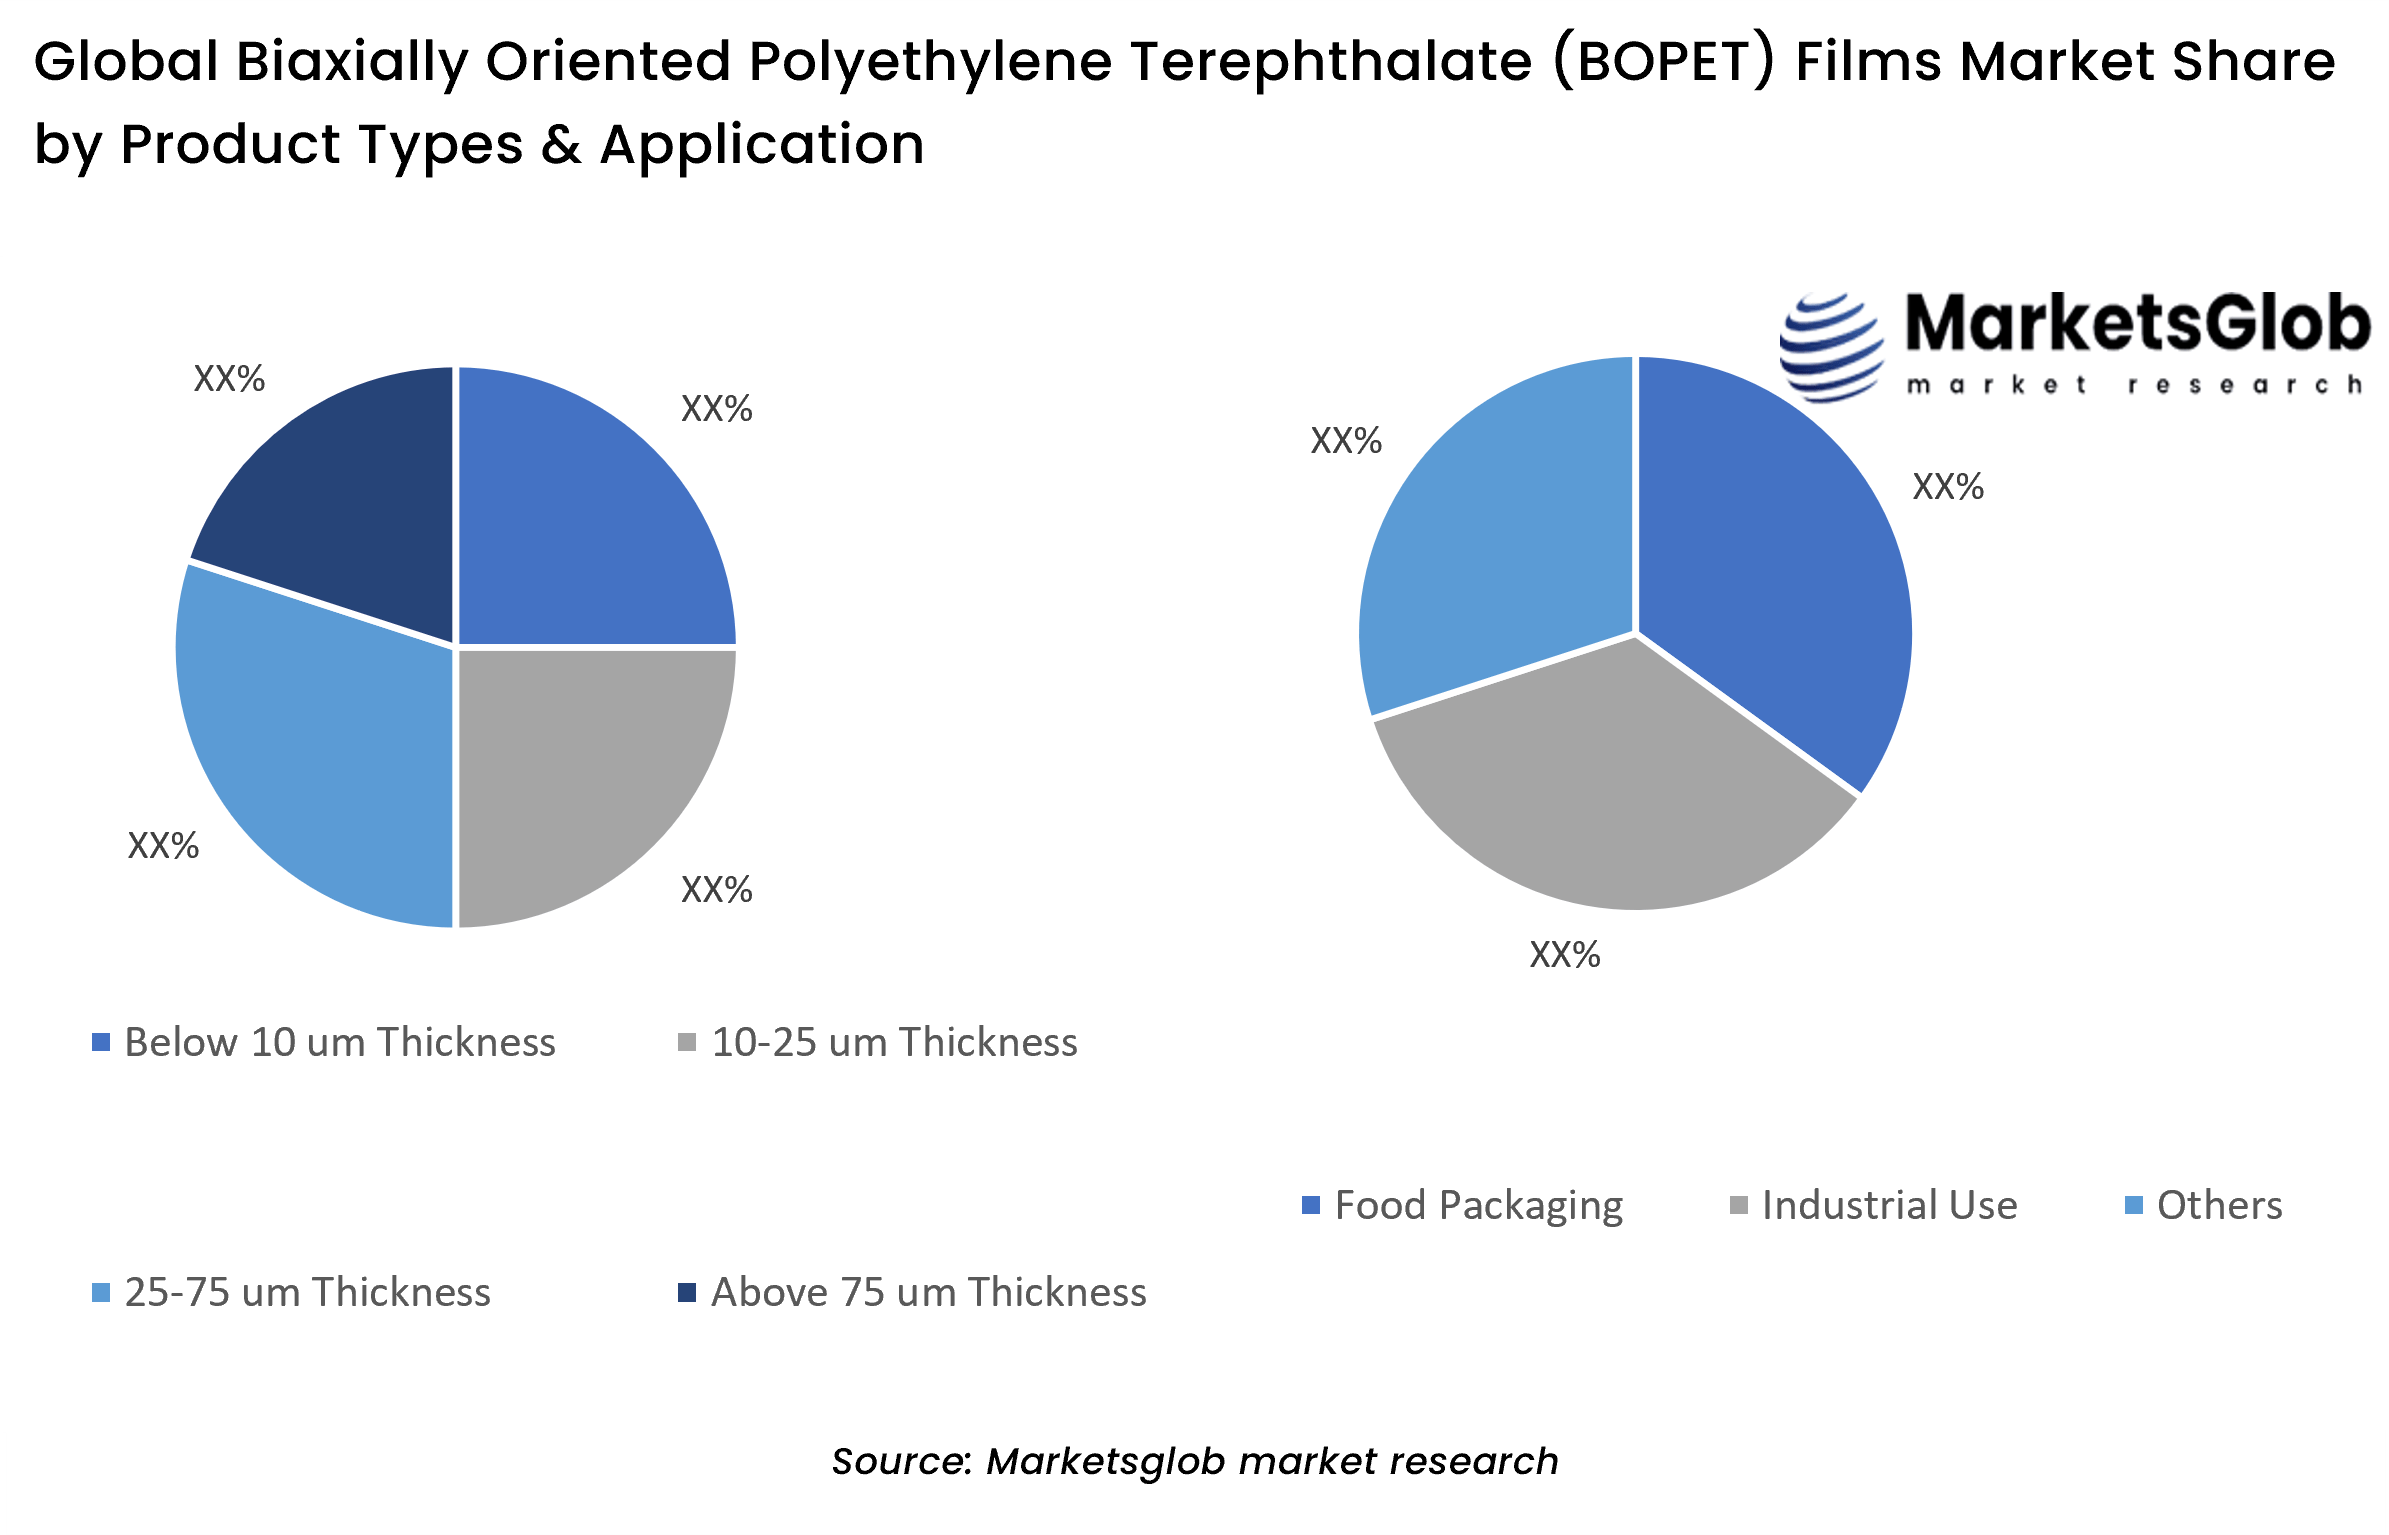 Biaxially Oriented Polyethylene Terephthalate (BOPET) Films Share by Product Types & Application